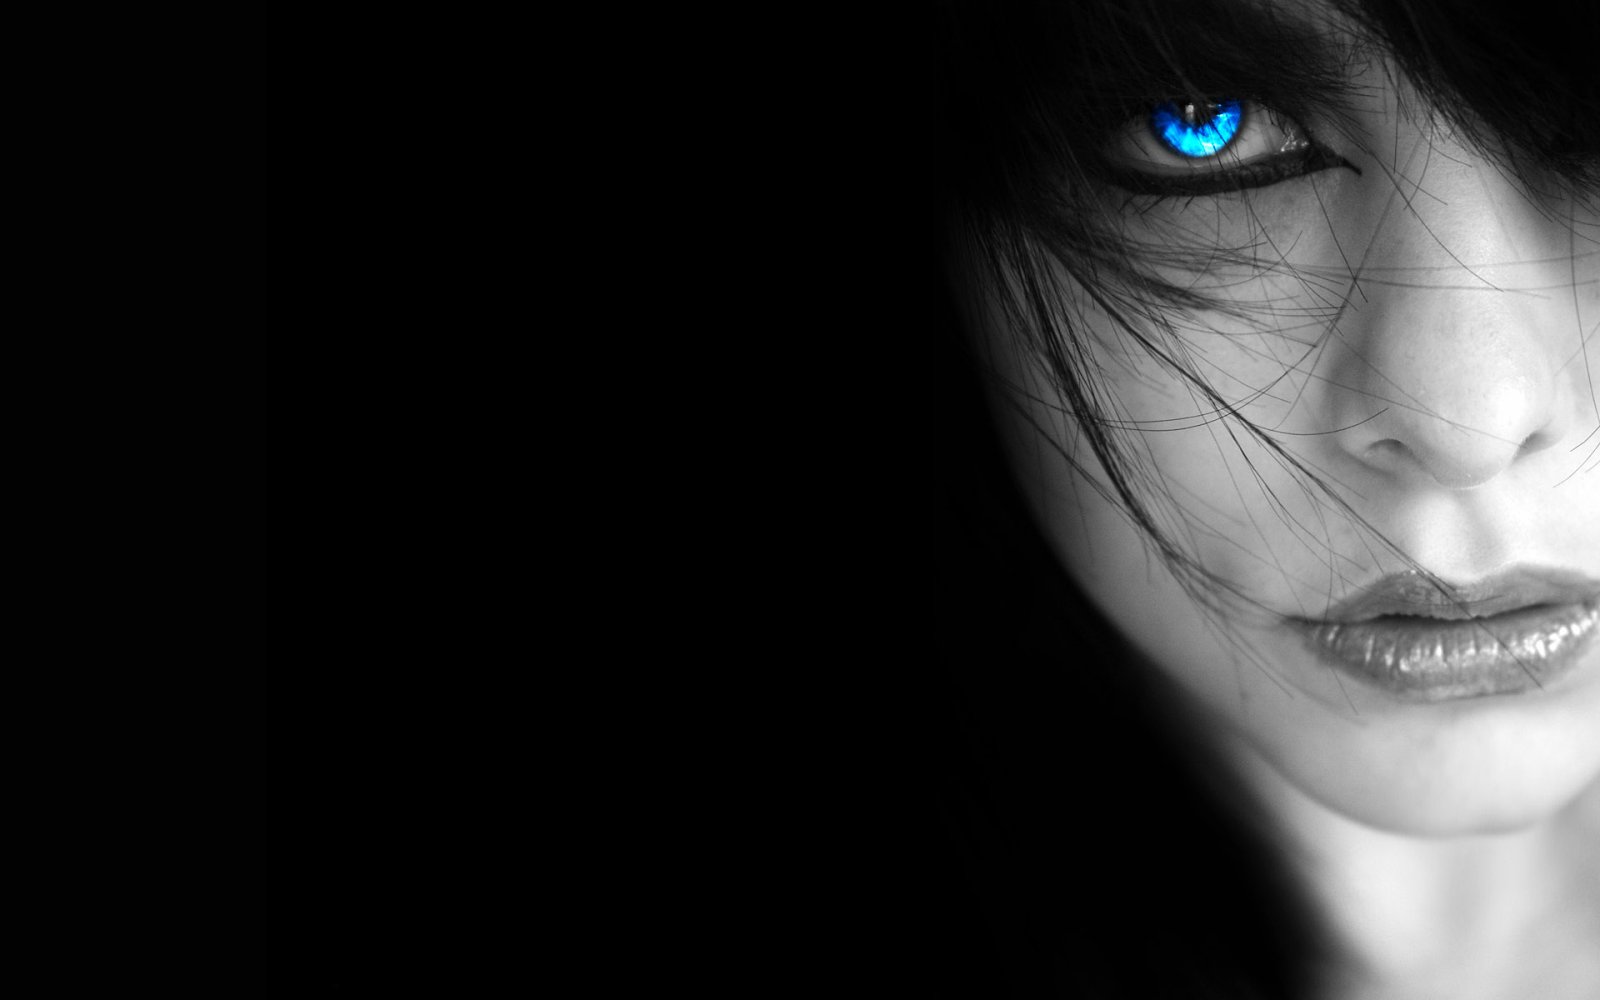 girl-with-blue-eye-wallpapers_22309_1920x1200.jpg